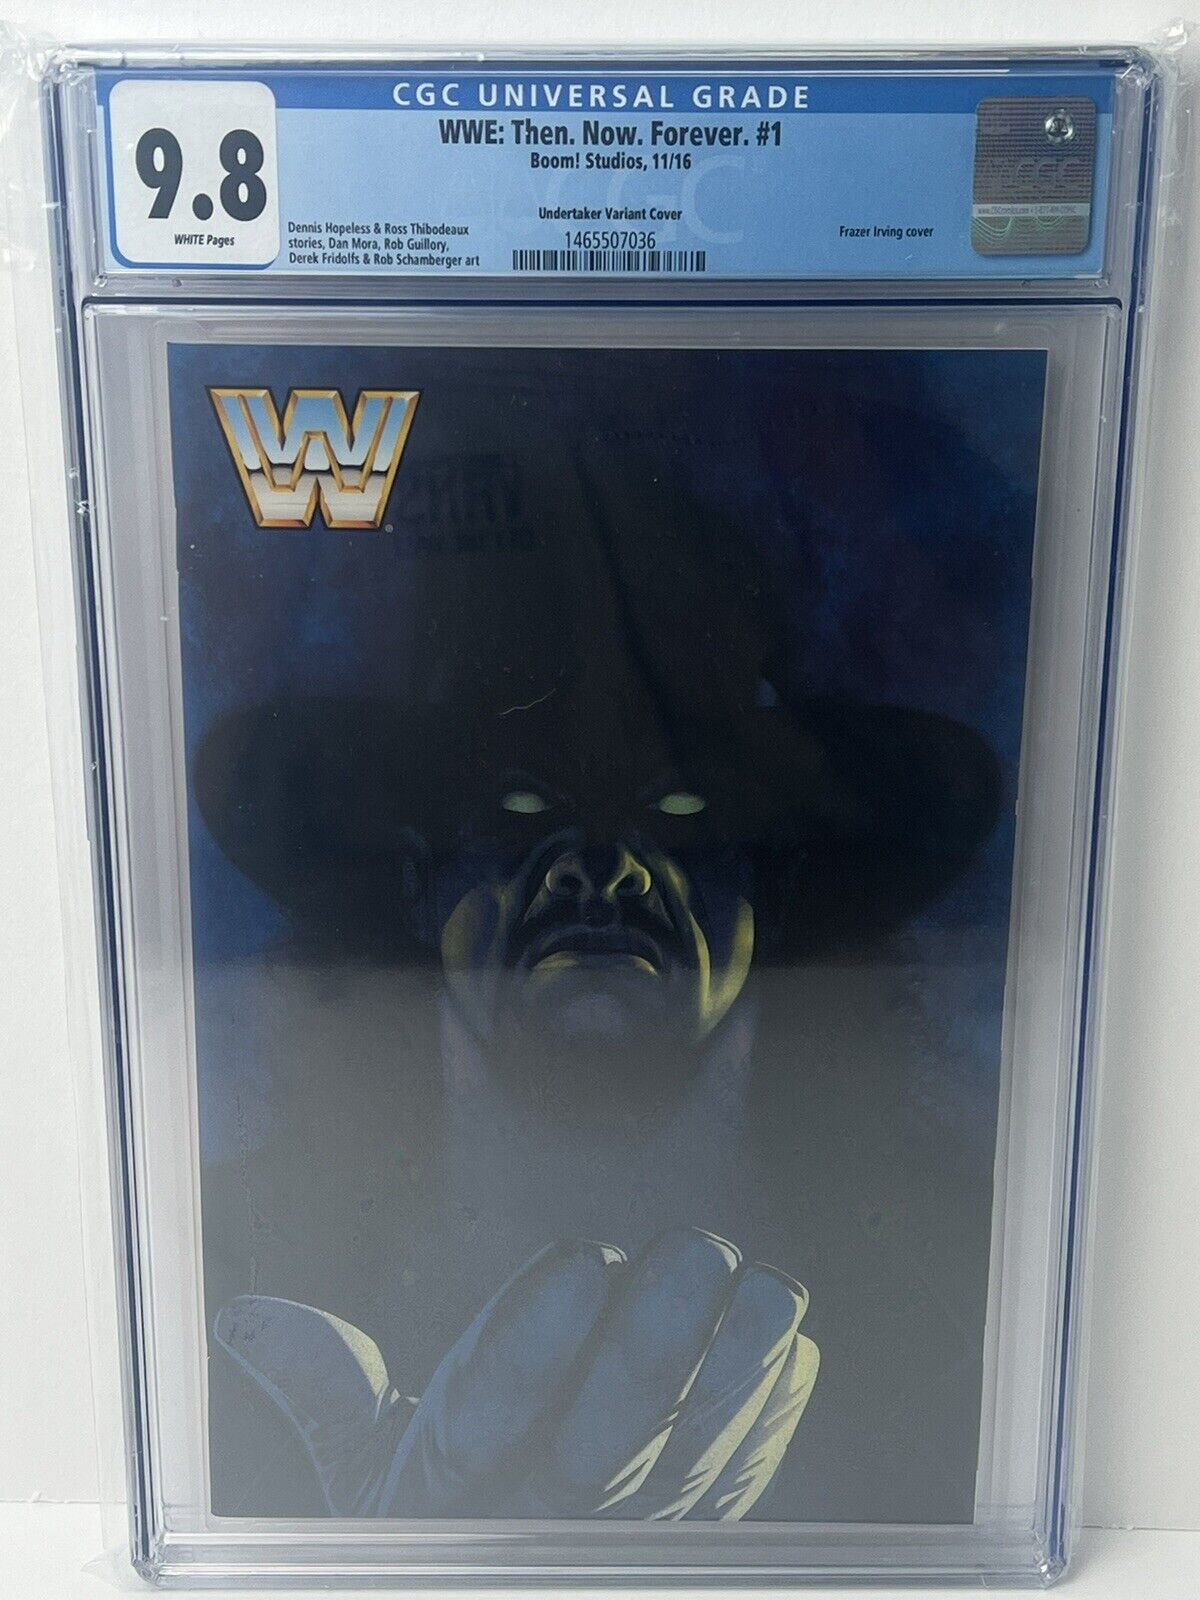 WWE: Then Now Forever #1 CGC 9.8 Boom Studios 1:50 Undertaker Variant Cover